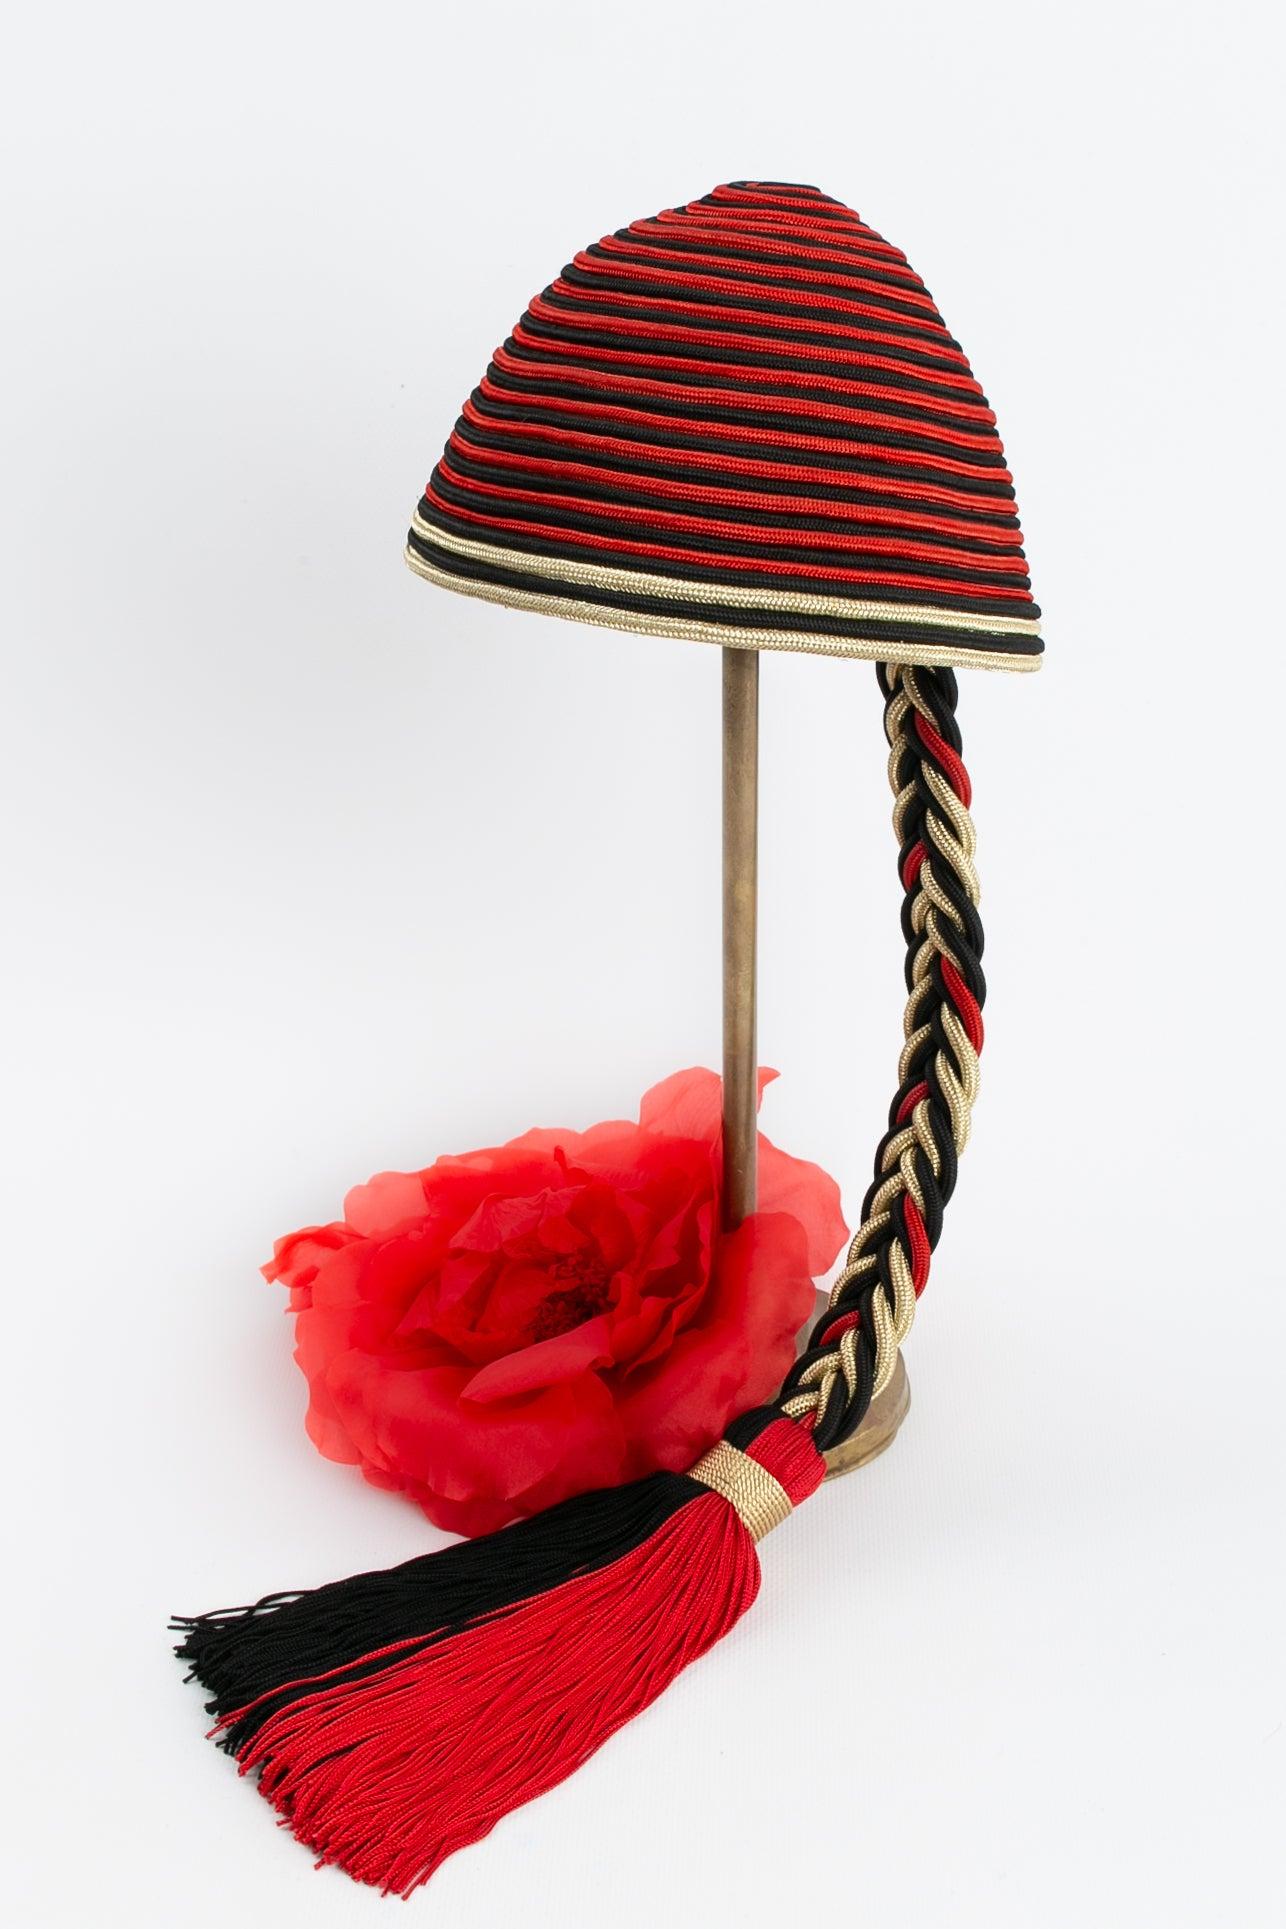 Yves Saint Laurent Fashion Show Hat in Red, Black and Gold Trimmings For Sale 5